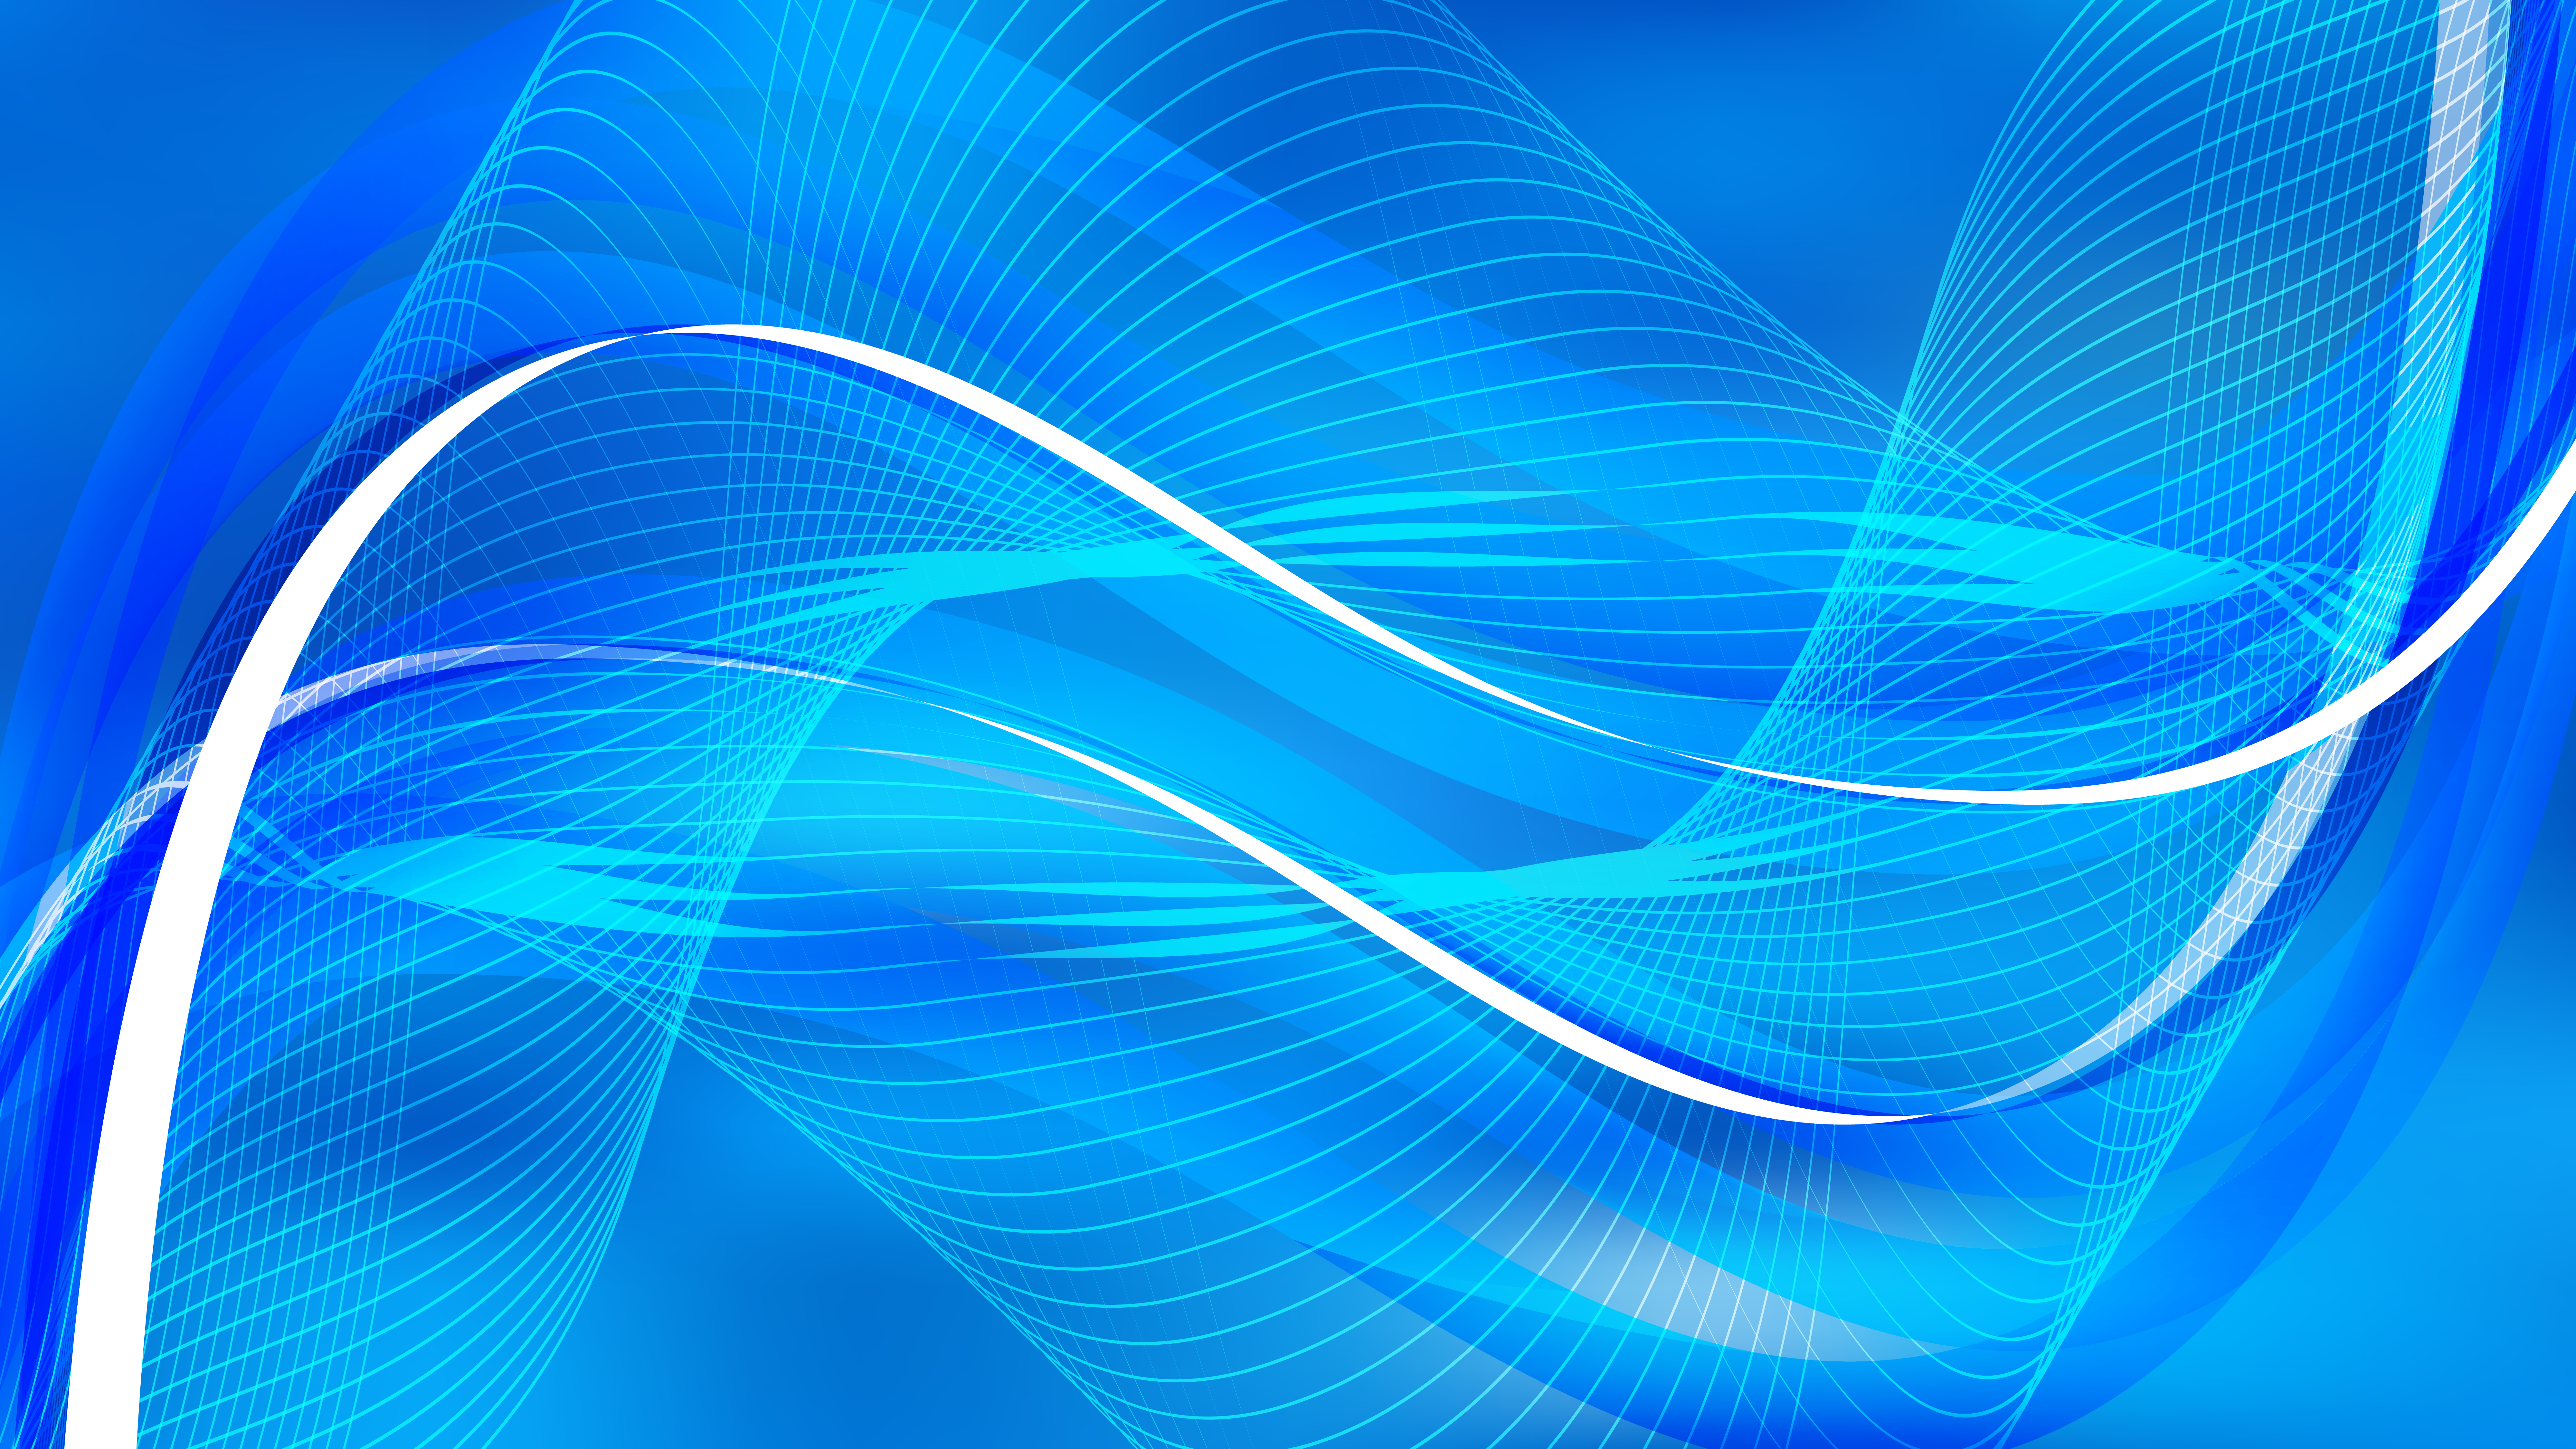 Free Abstract Dark Blue Flow Curves Background Vector Image